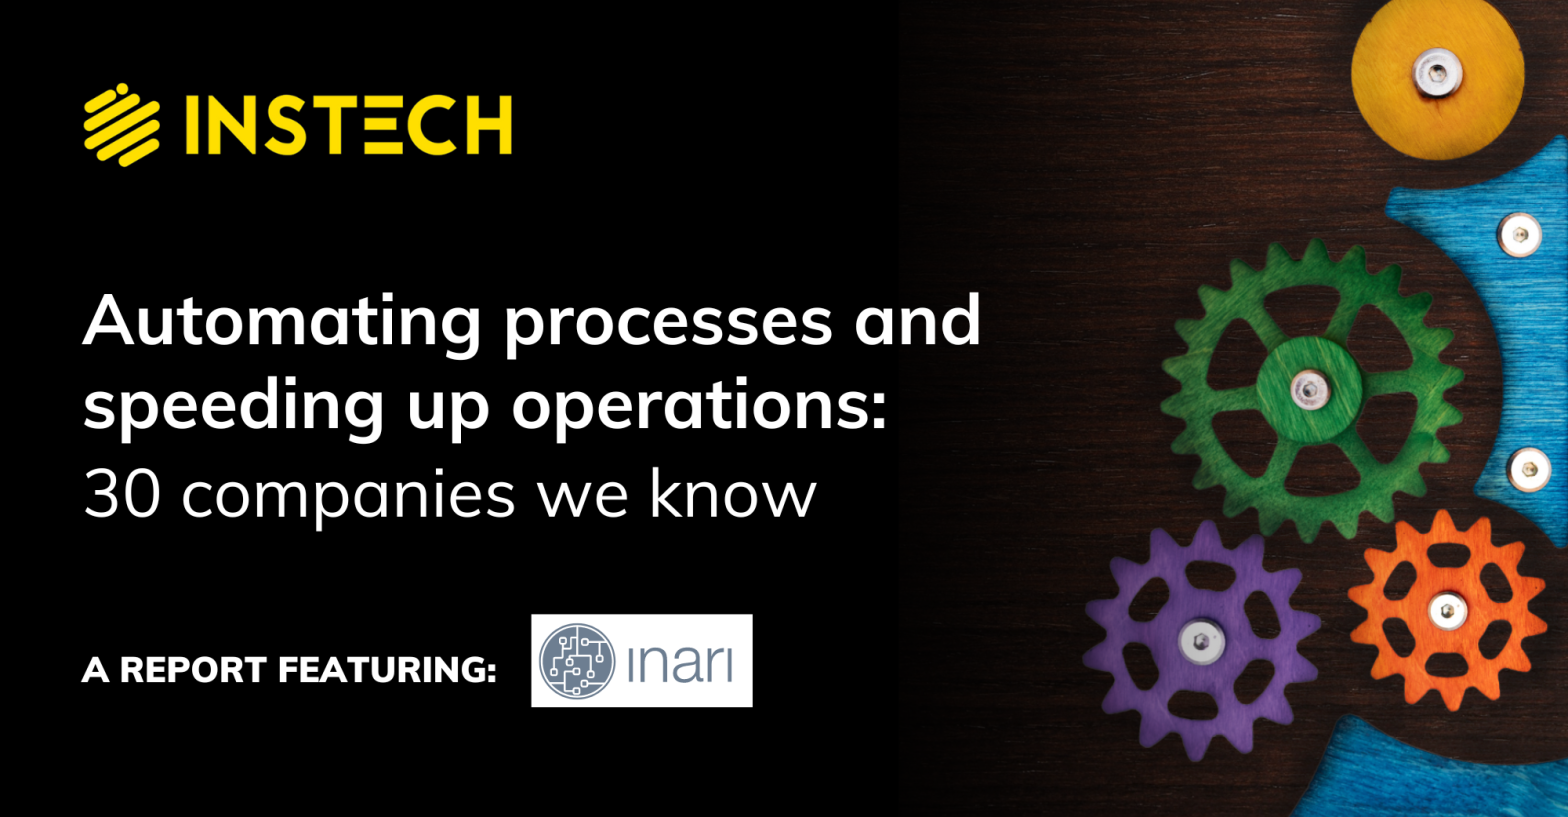 Inari features in Instech’s latest report